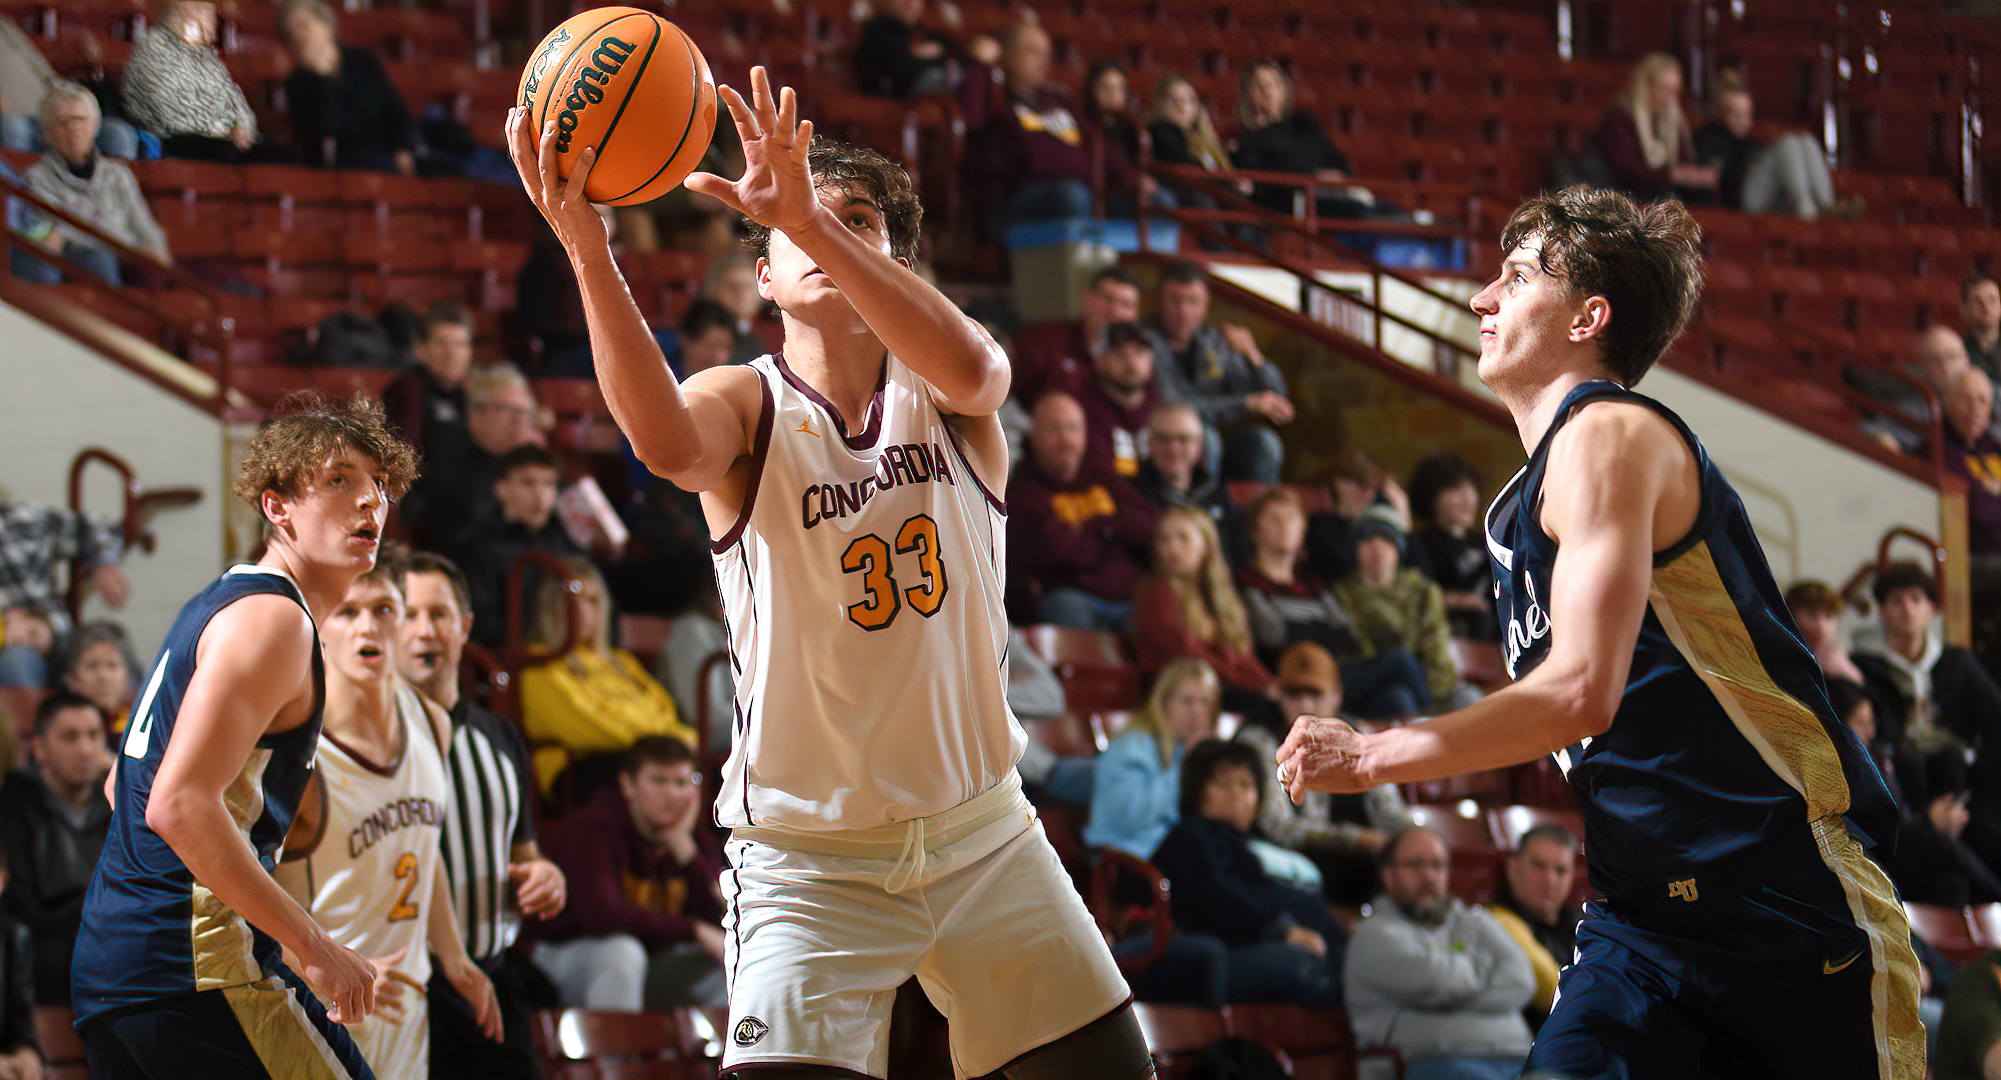 Jacob Cook goes to the basket for two of his 14 points in the Cobbers' game with Bethel. He also had 11 rebounds to post his first double-double.